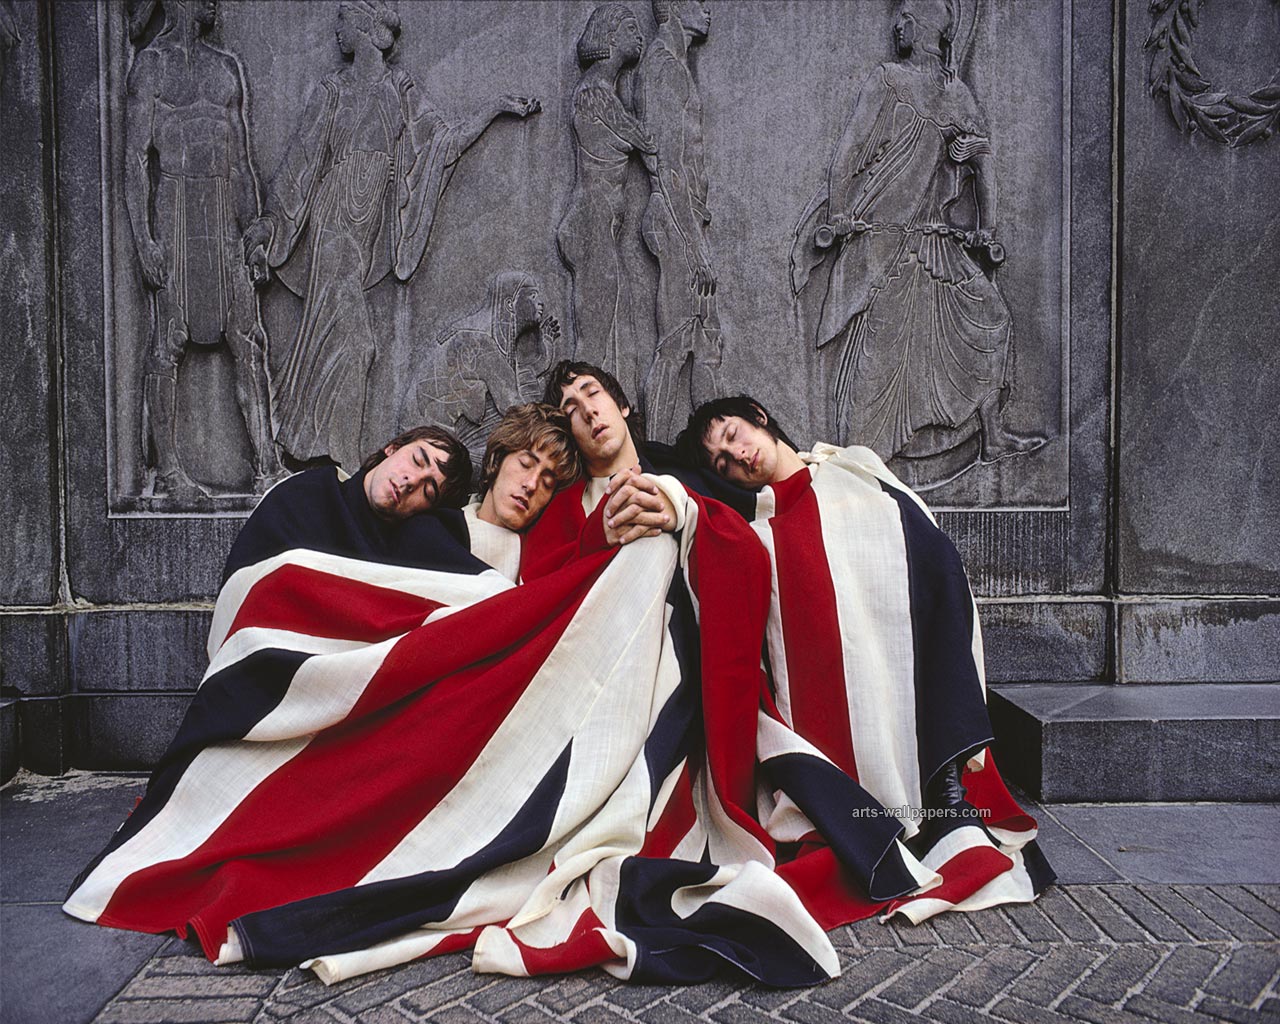 The Who - The Who Wallpaper (29328628) - Fanpop